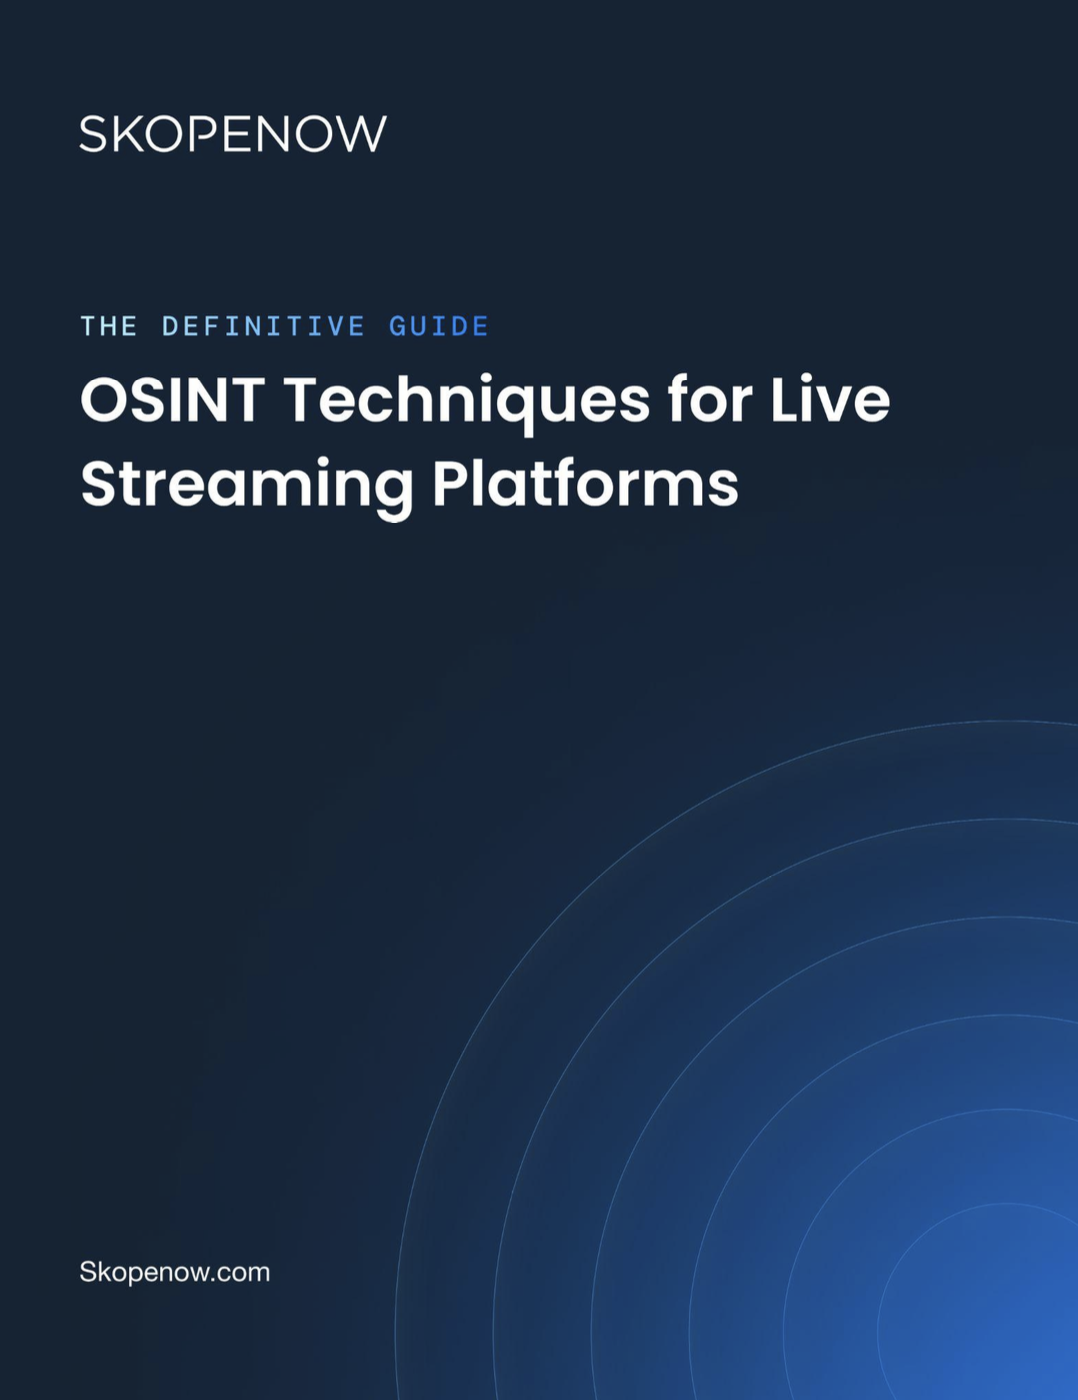 The Definitive Guide: OSINT for Live Streaming Platforms